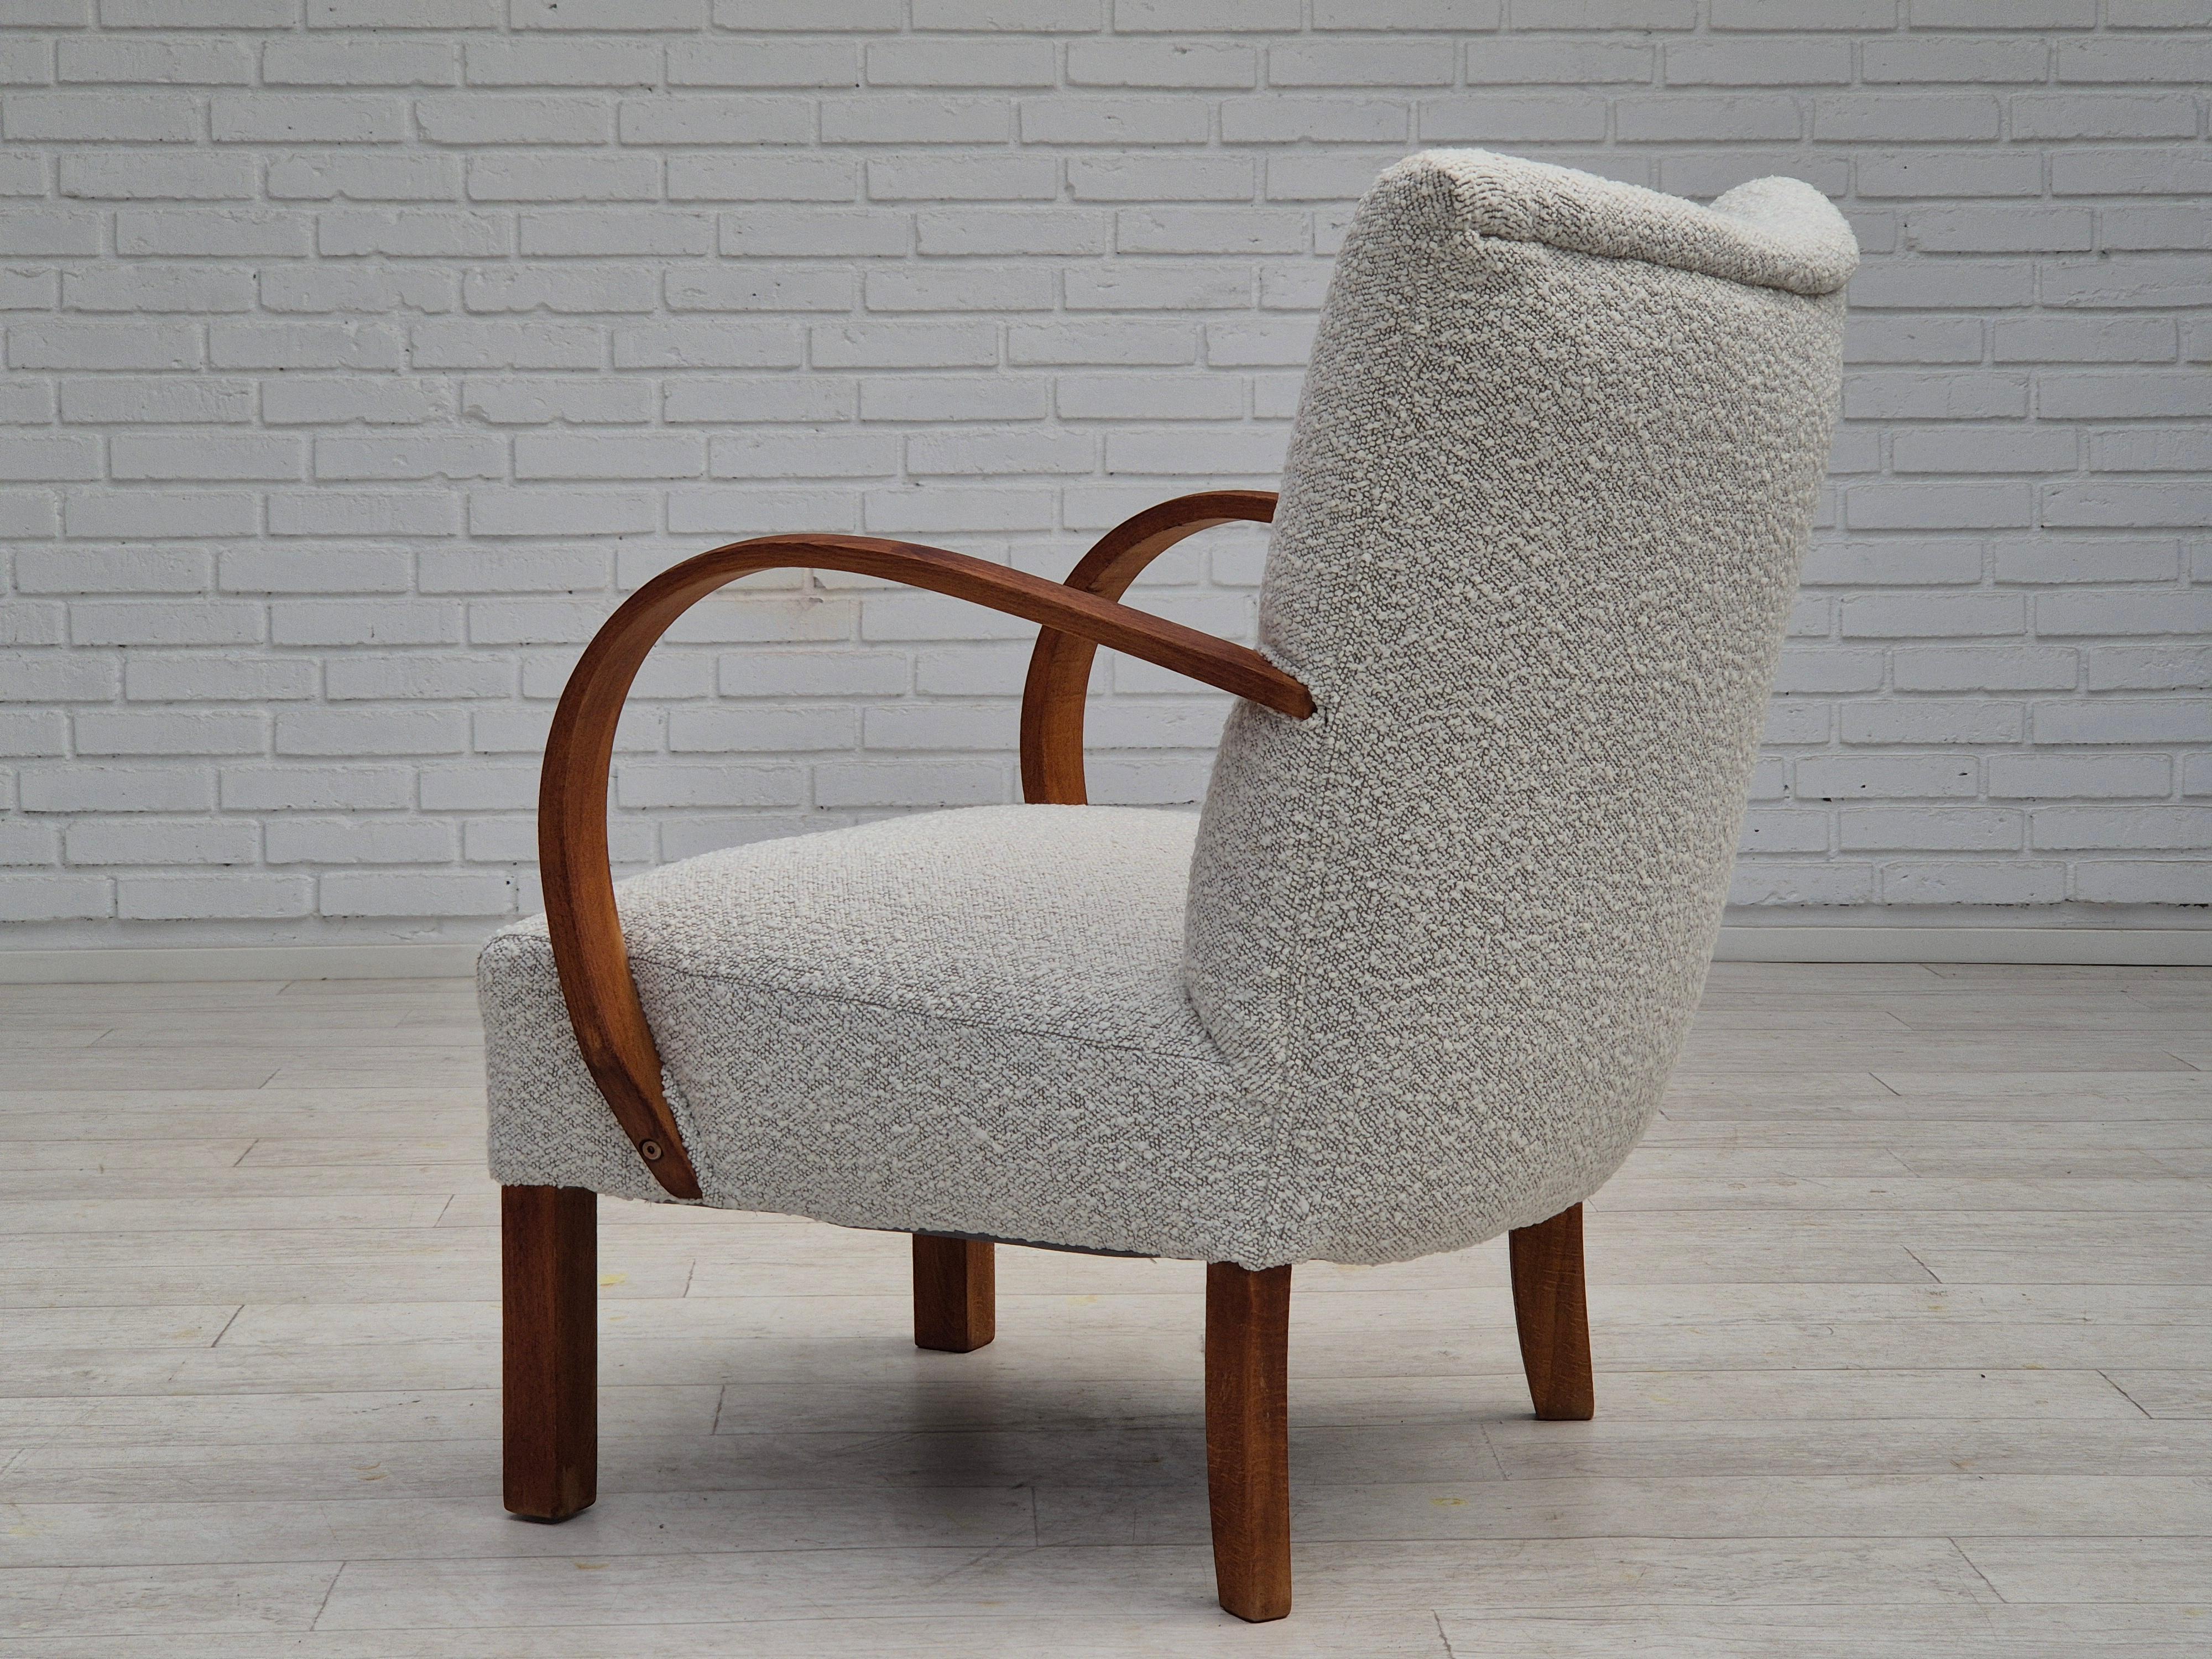 1960s, reupholstered Danish art-deco armchair, beech wood, leather. For Sale 1